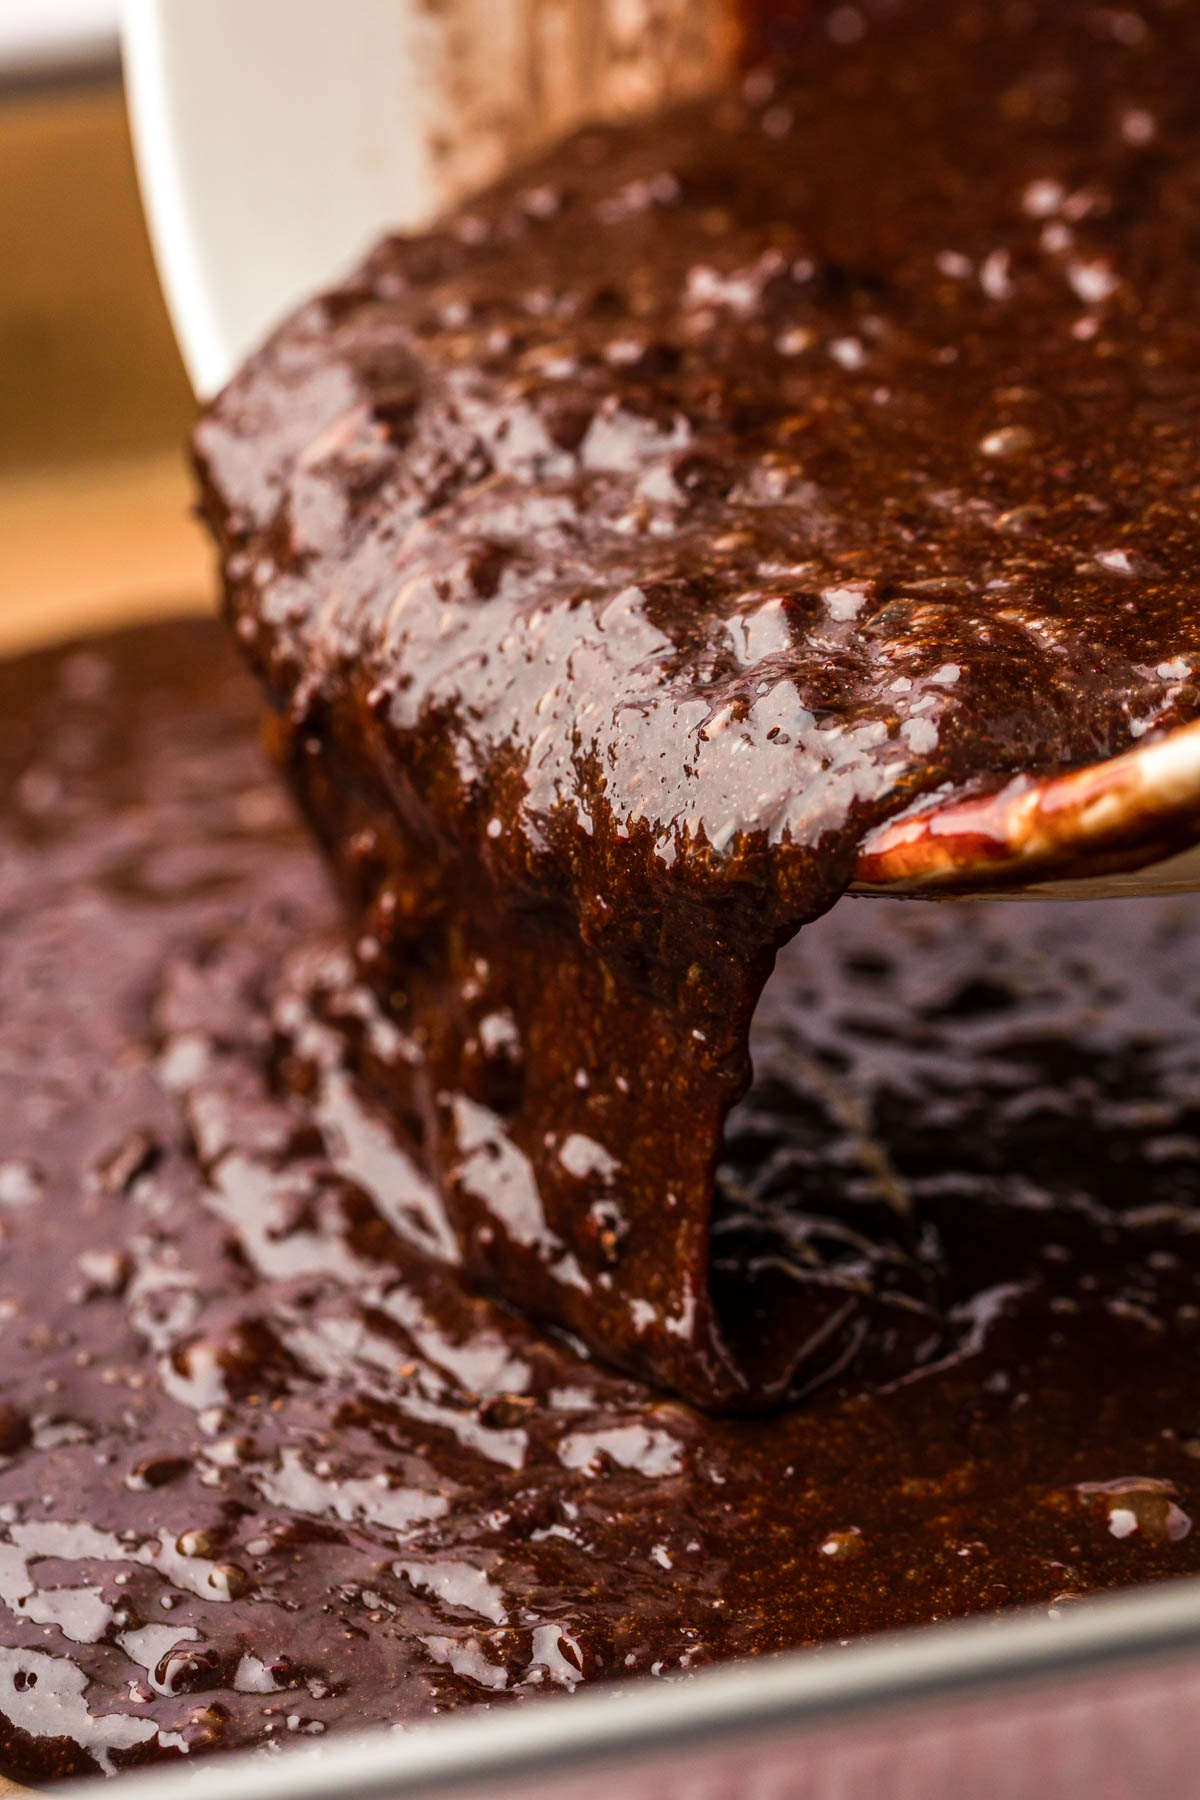 Brownie batter being poured into a parchment lined baking pan.